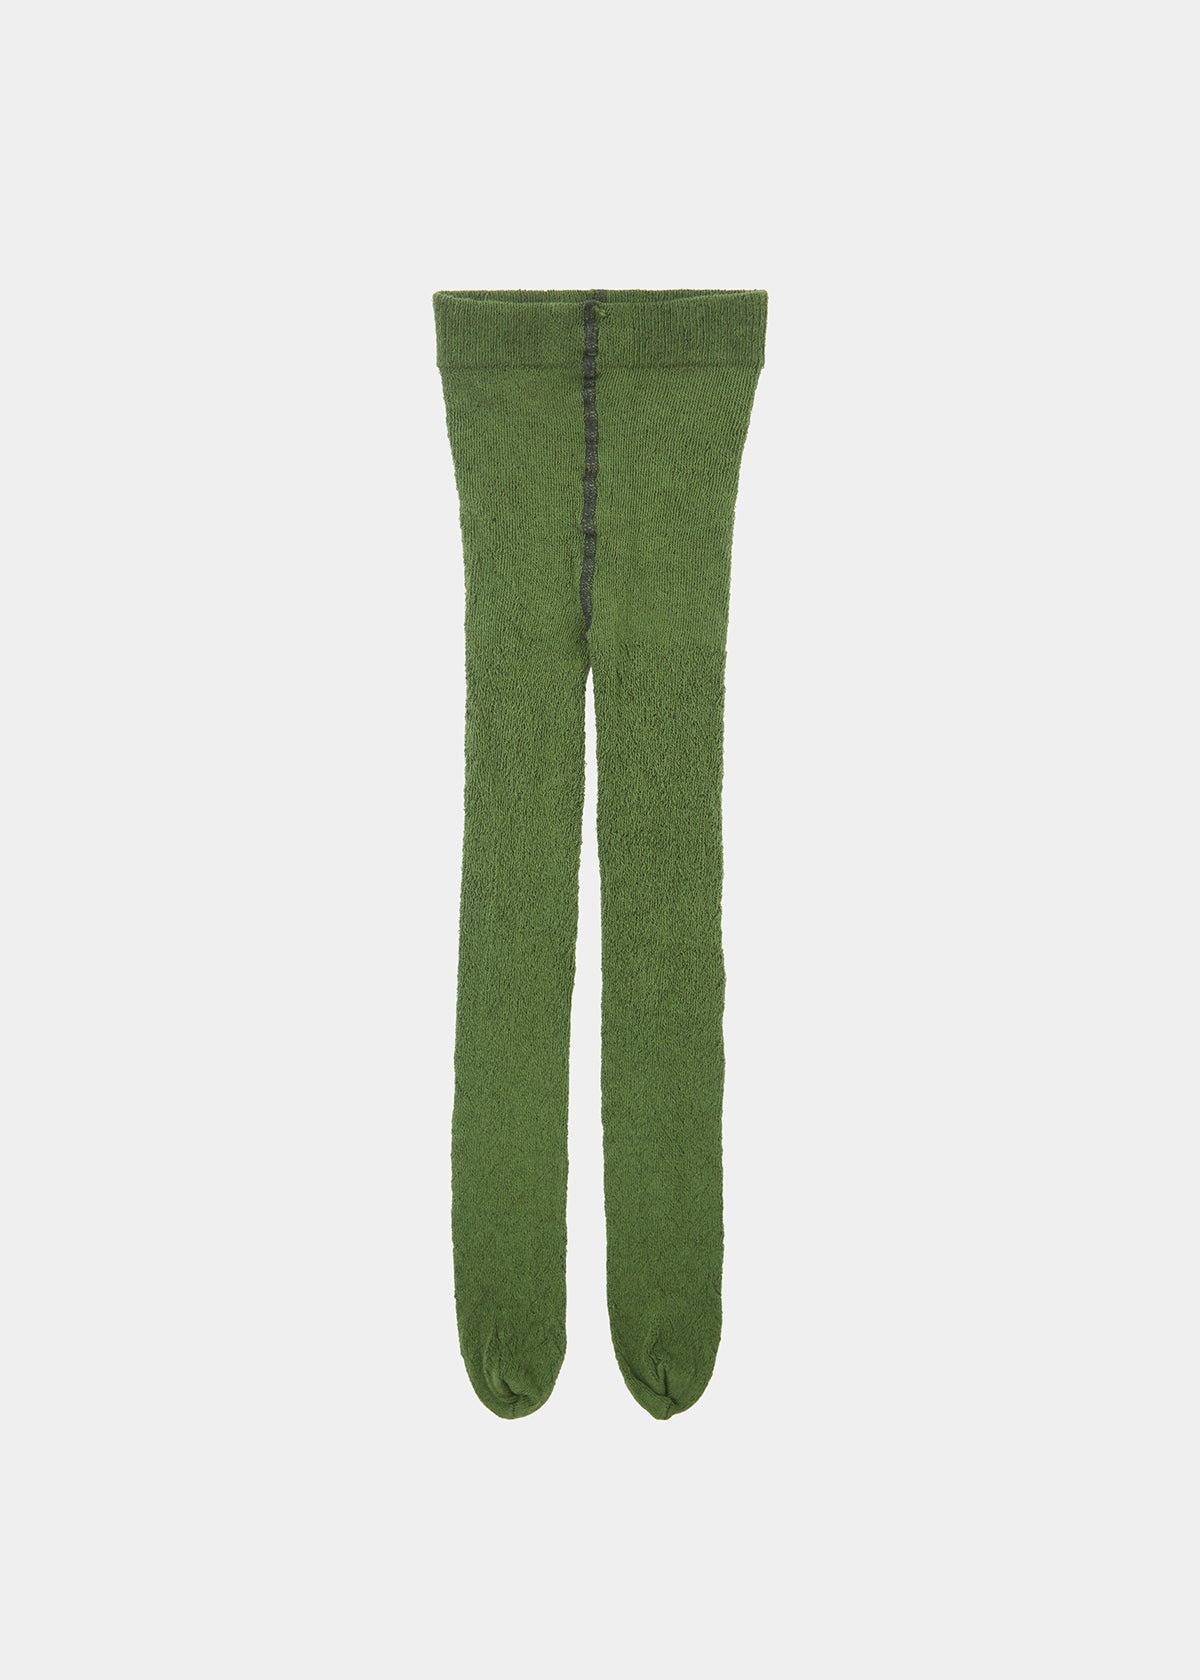 BABY POINTELLE TIGHTS - FOREST GREEN (FRONT)